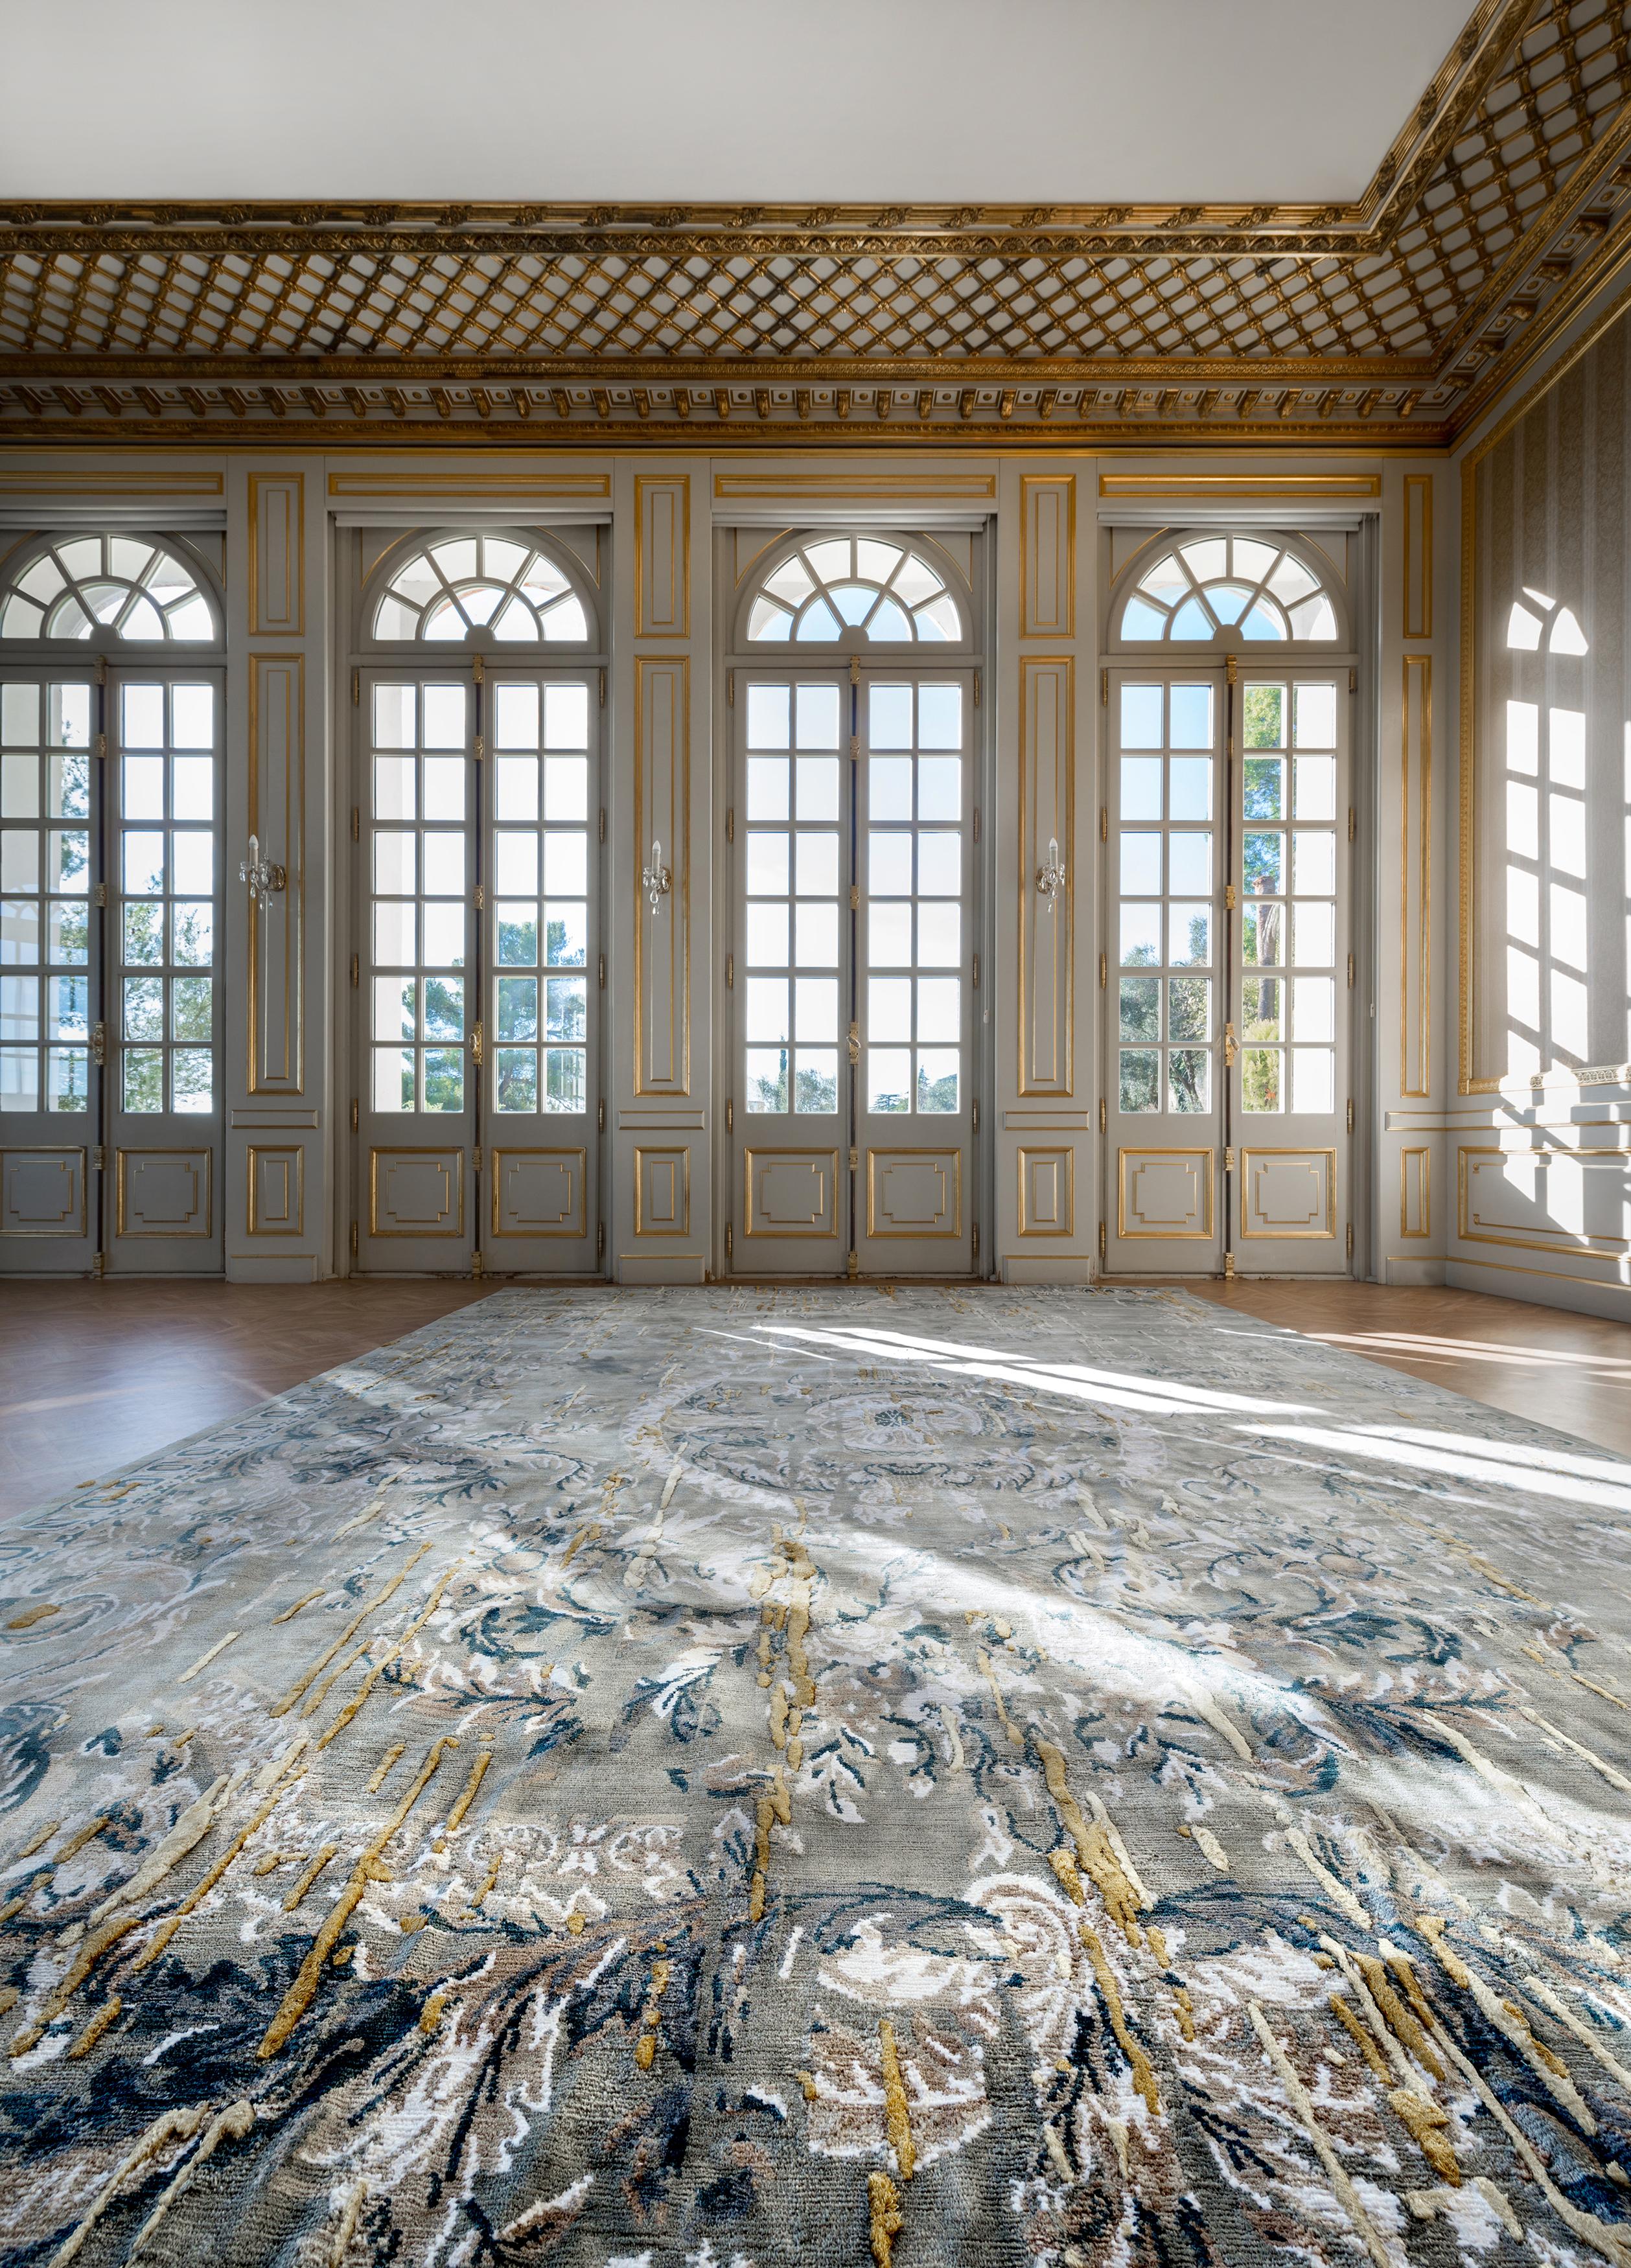 Lully Cytisus
Rug from Renaissance collection of Edition Bougainville
Nepalese hand knotted
All art silk
Size: 300 x 400cm.

Renaissance
The Age of Enlightenment is the main inspirational thread behind our luxurious rug collection, Renaissance. Our